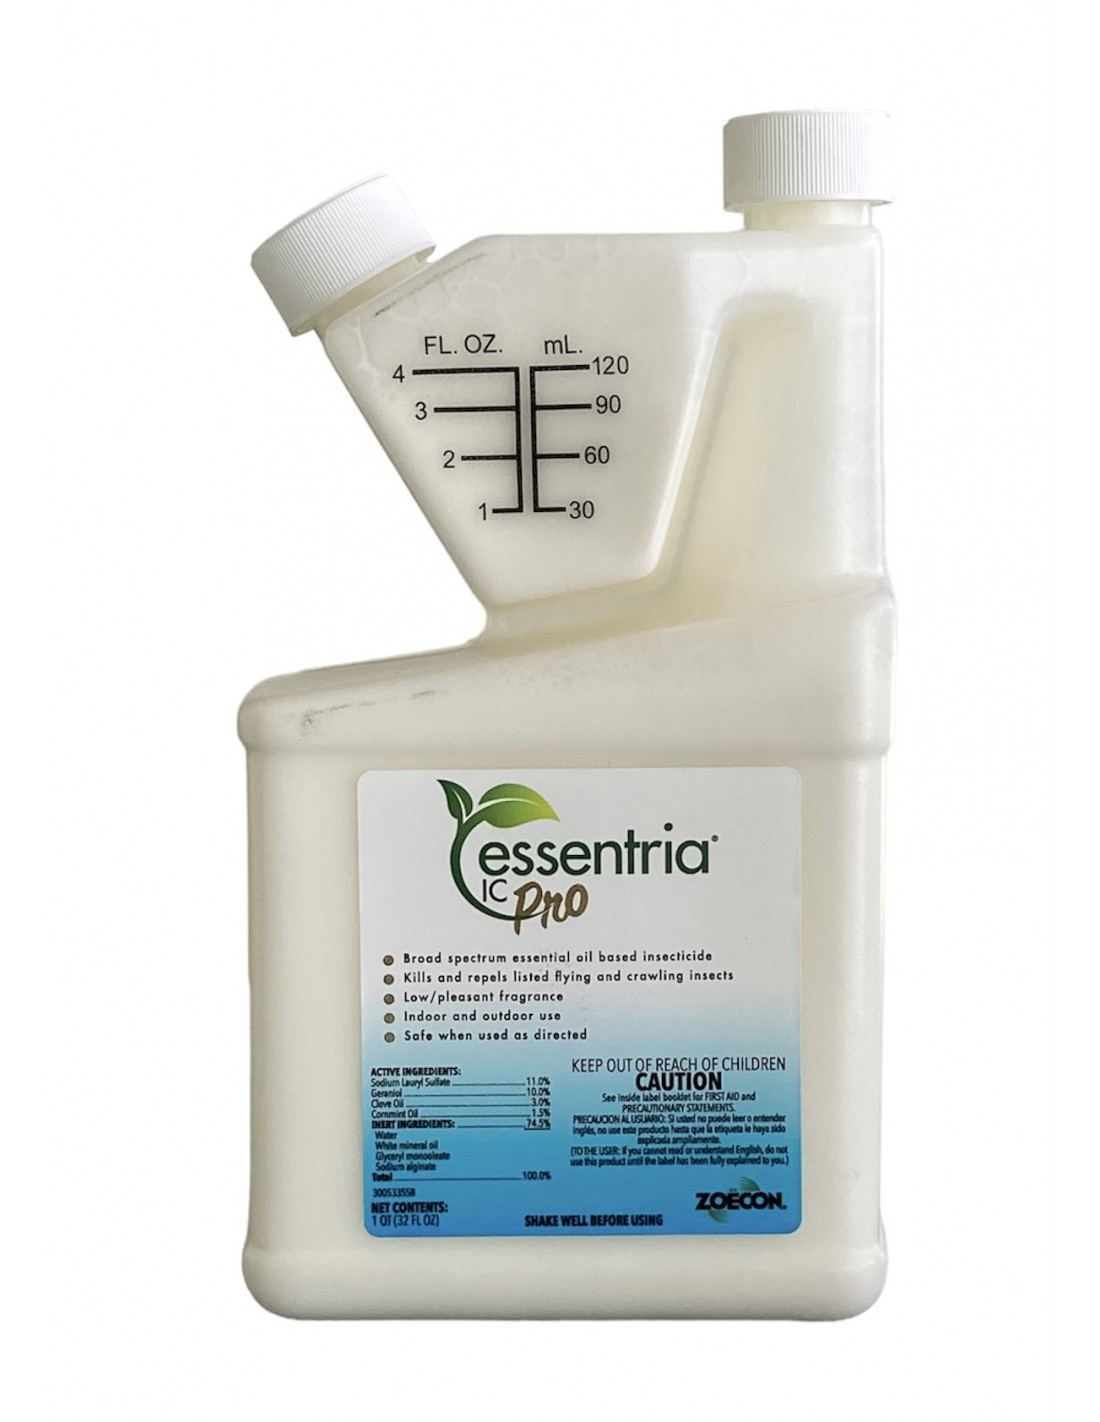 Will I need to reapply Essentria after it rains?